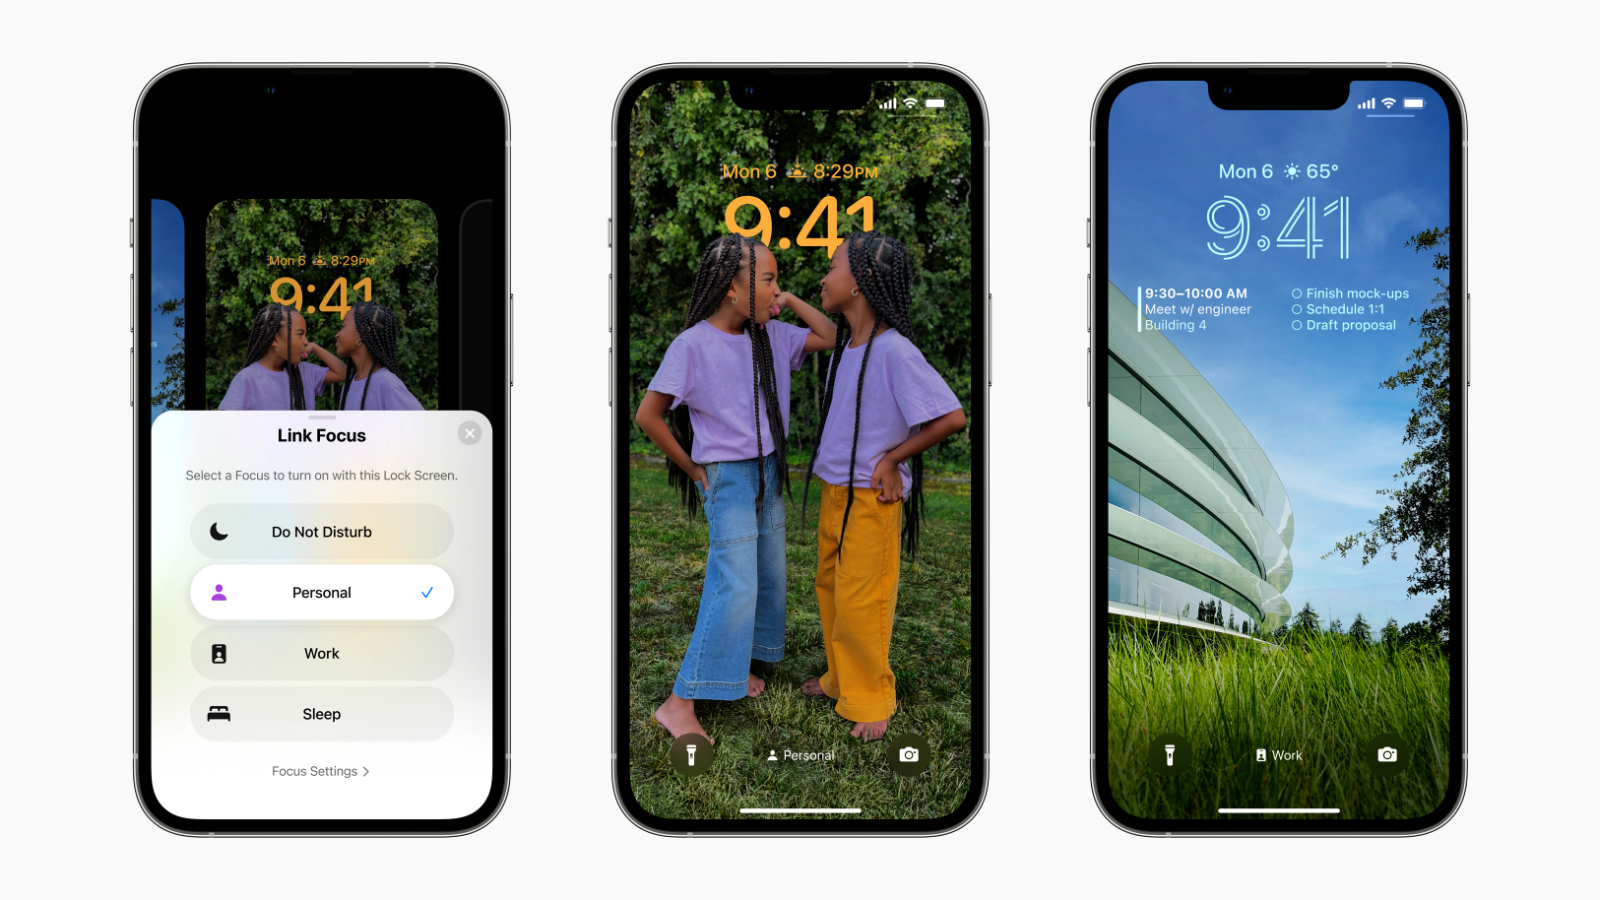 Apple Improves Focus Modes With Filters, Linked Lock Screens, and Set Up Enhancements